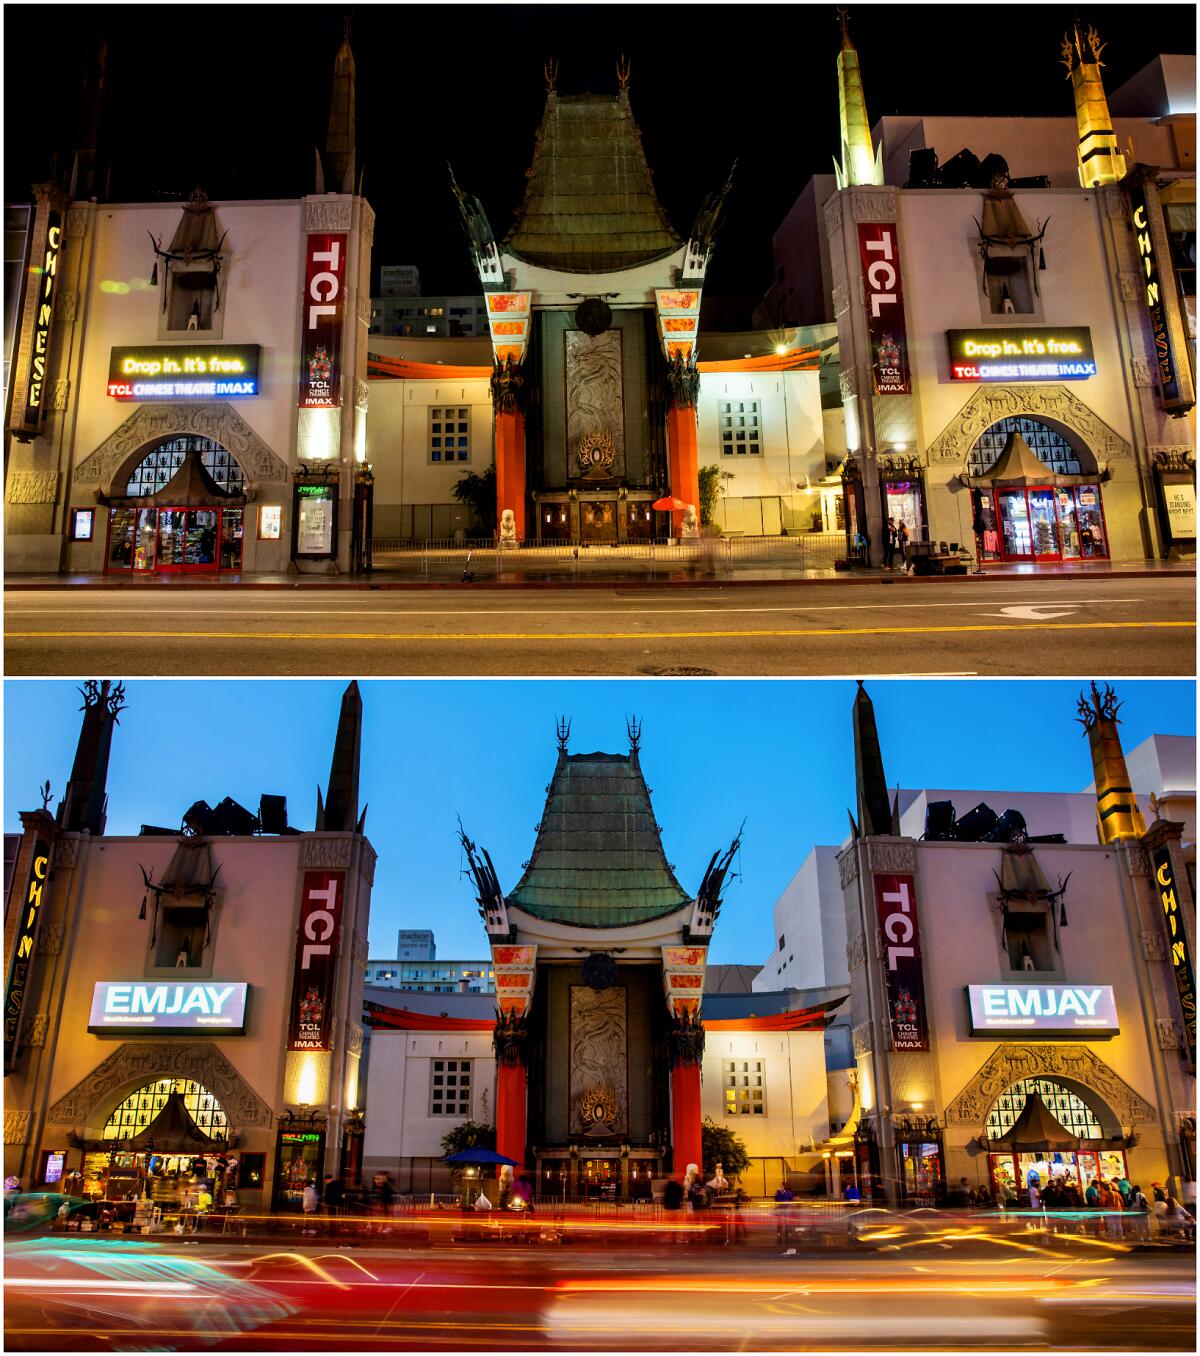 Paired photos of the TCL Chinese Theatres on Hollywood Boulevard in March 2020 and in March 2021.